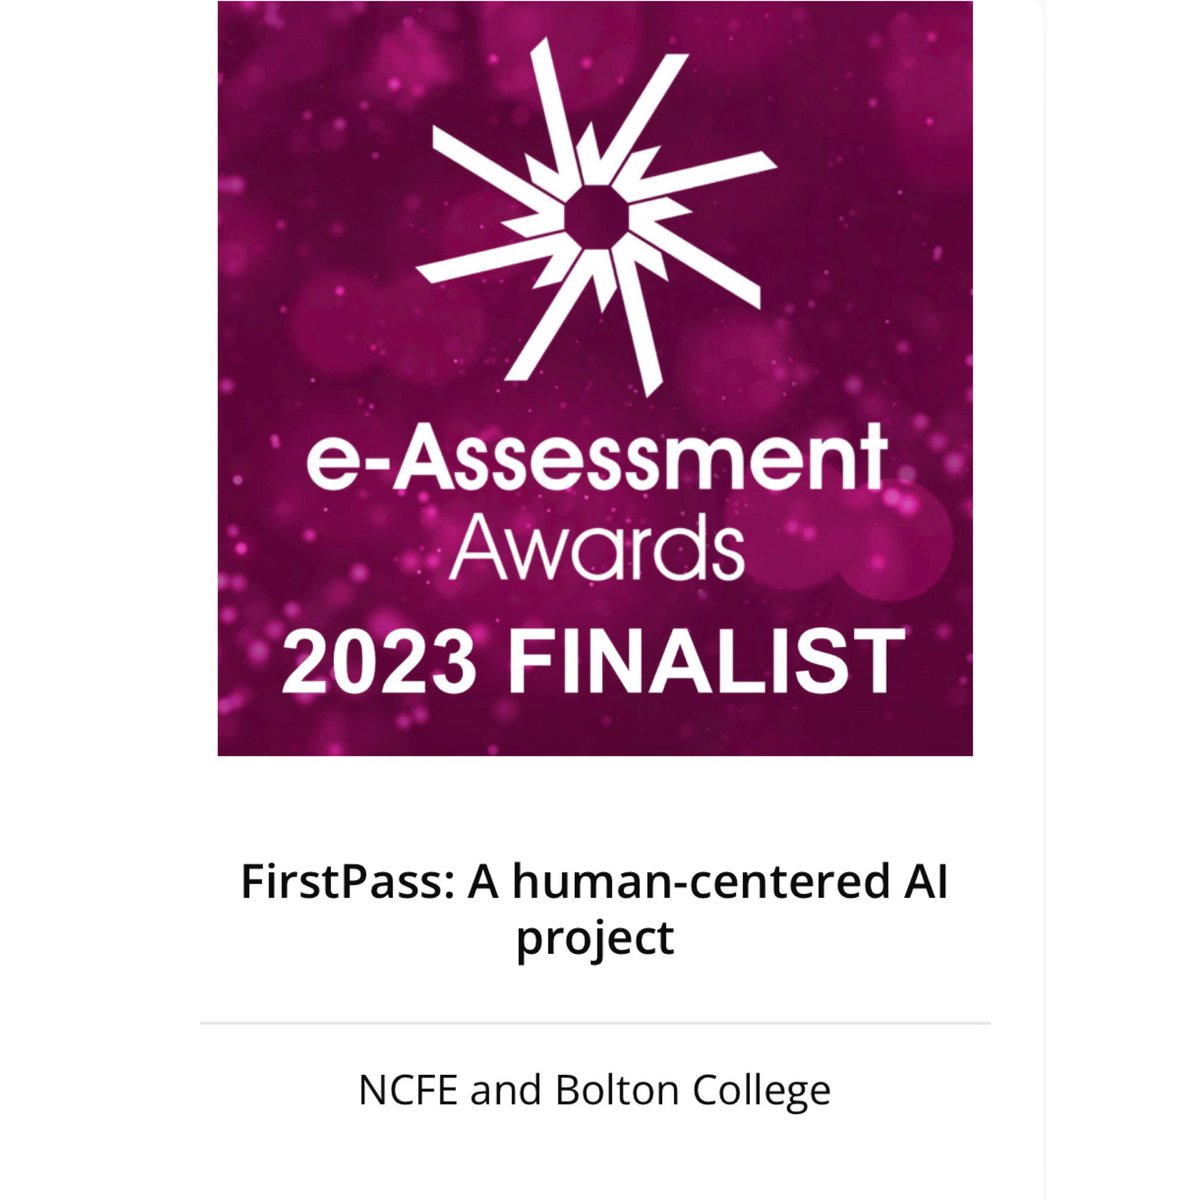 NCFE and Bolton College shortlisted for e-Assessment Award